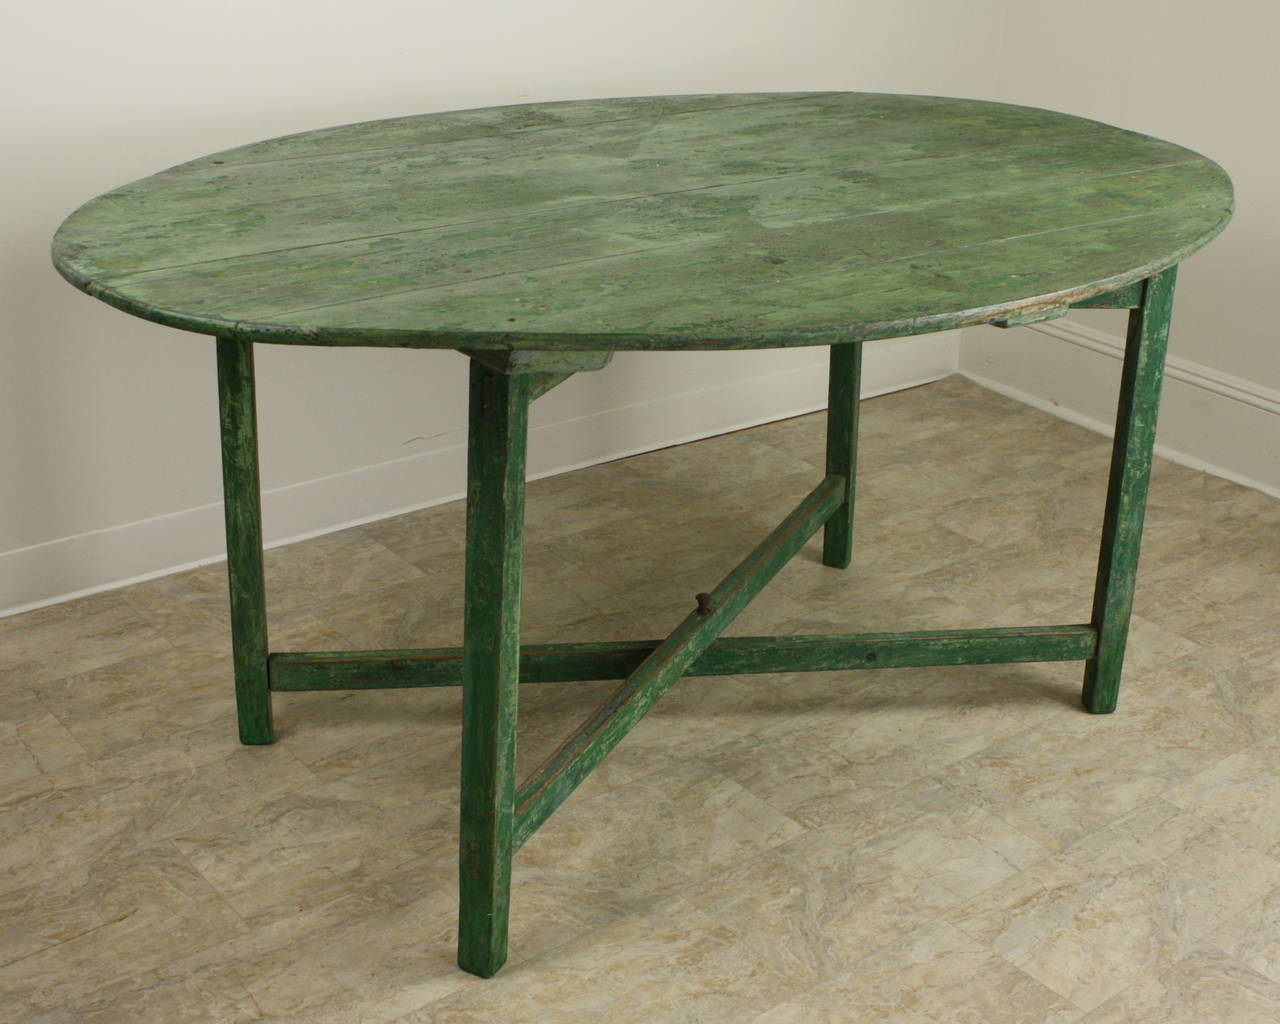 Delightful, lots of old green paint still showing, this oval table is for an upscale country house, makes a great breakfast or lunch table, good-looking farm table base at 67